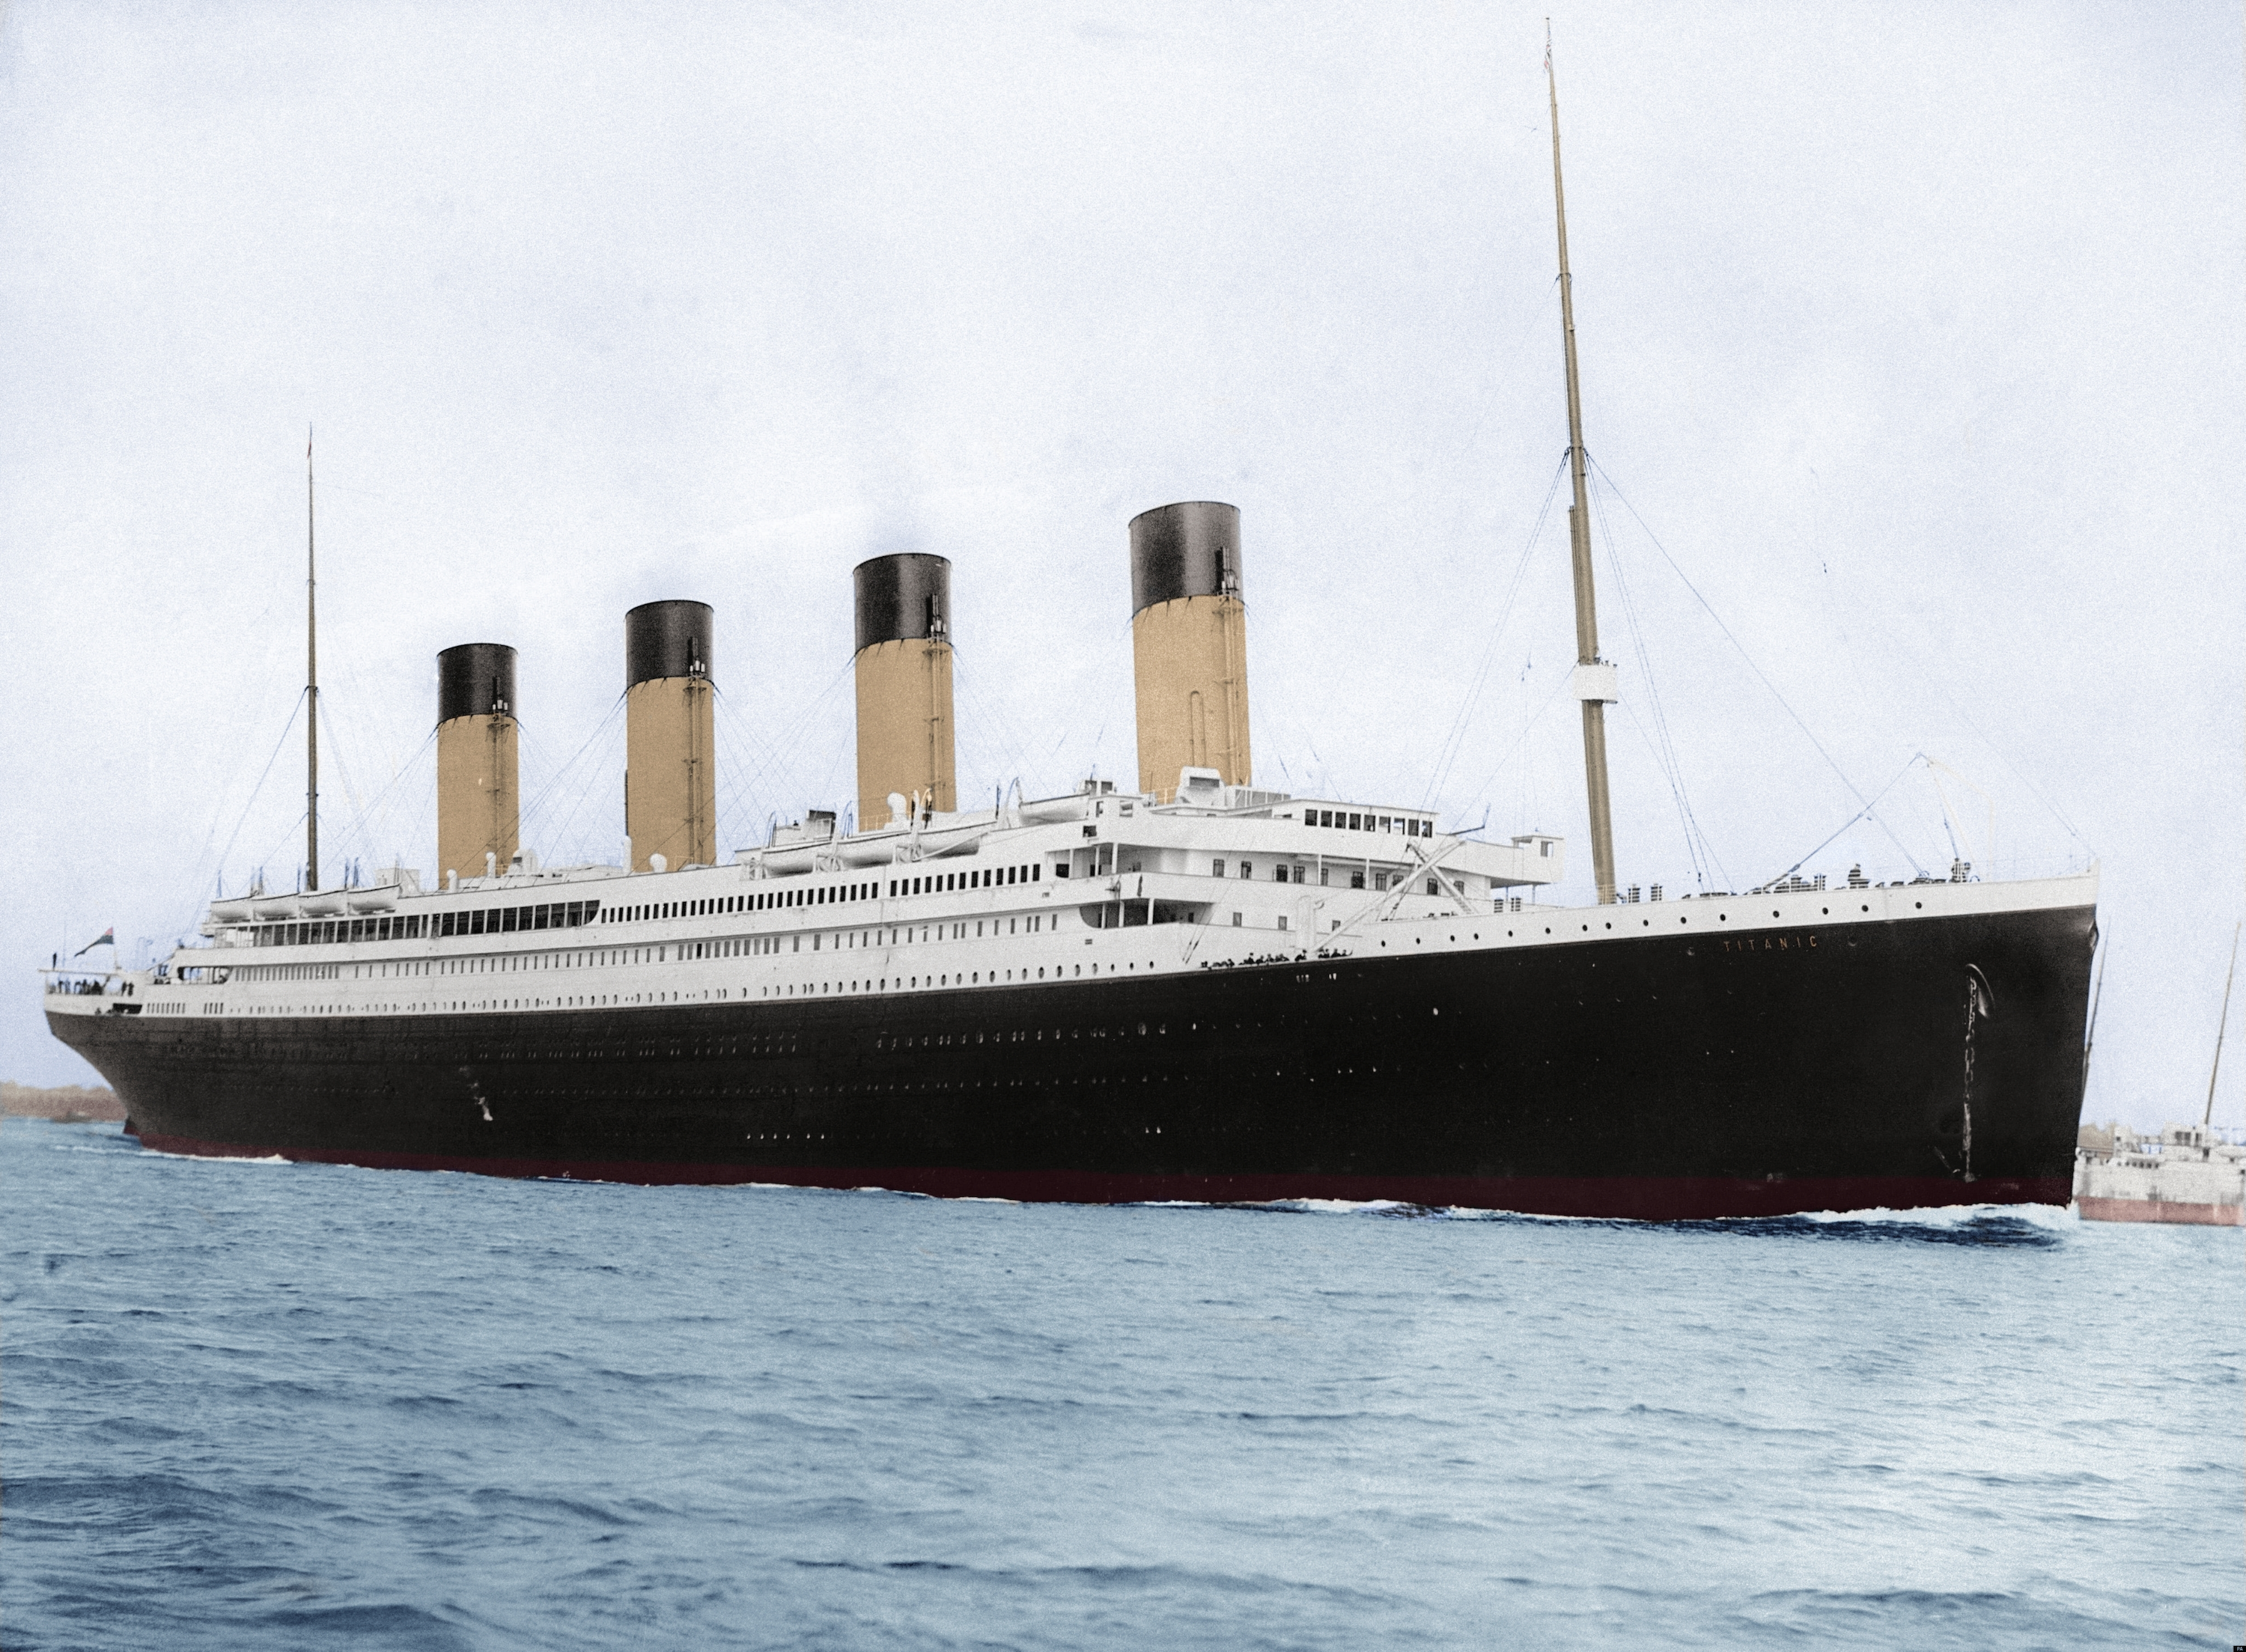 Why were the Titanic's passengers divided into three separate